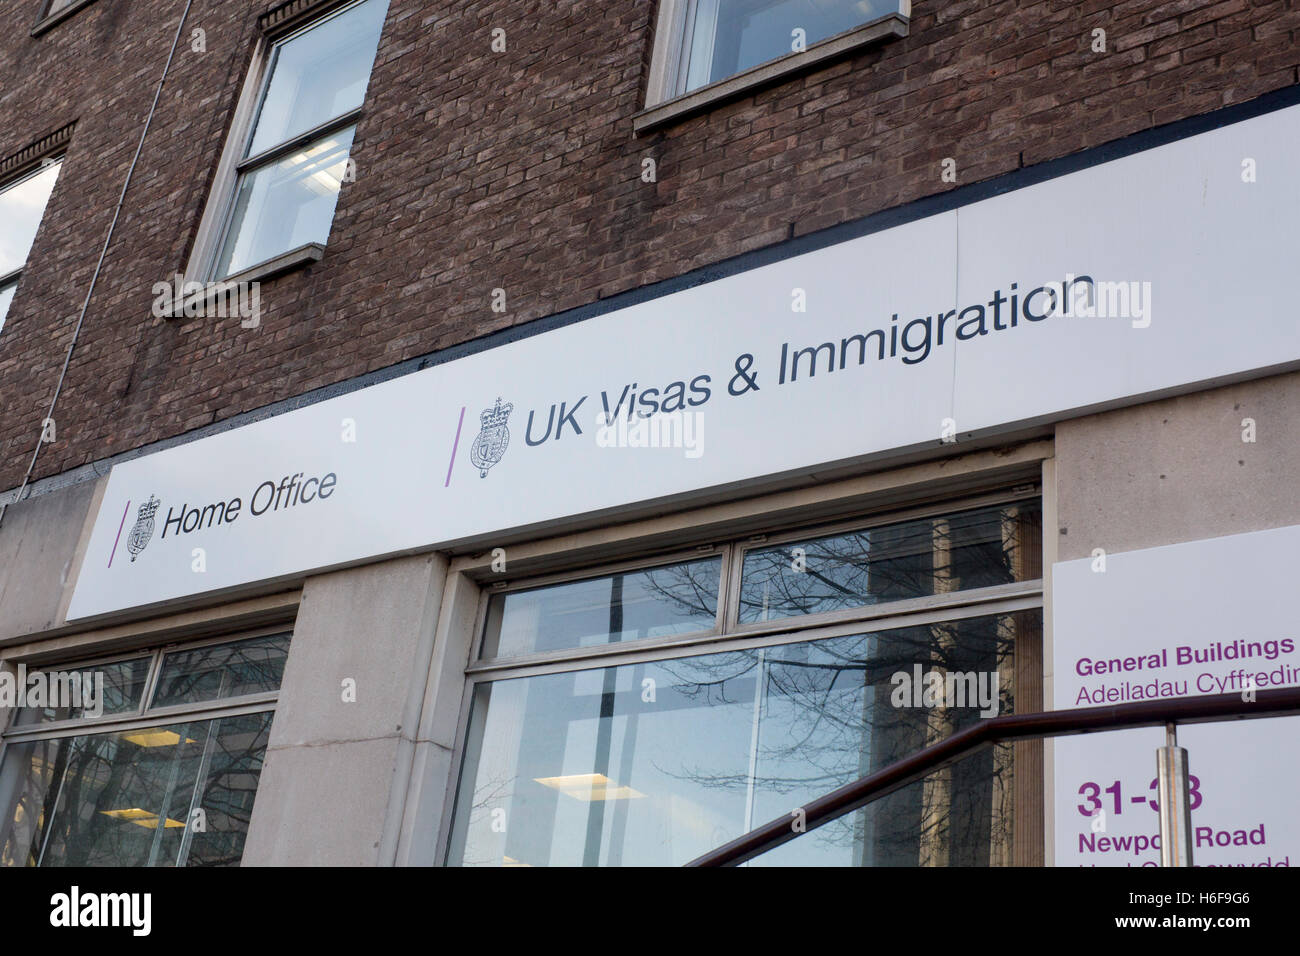 Home Office UK Visas and Immigration office sign Cardiff Wales UK Stock Photo